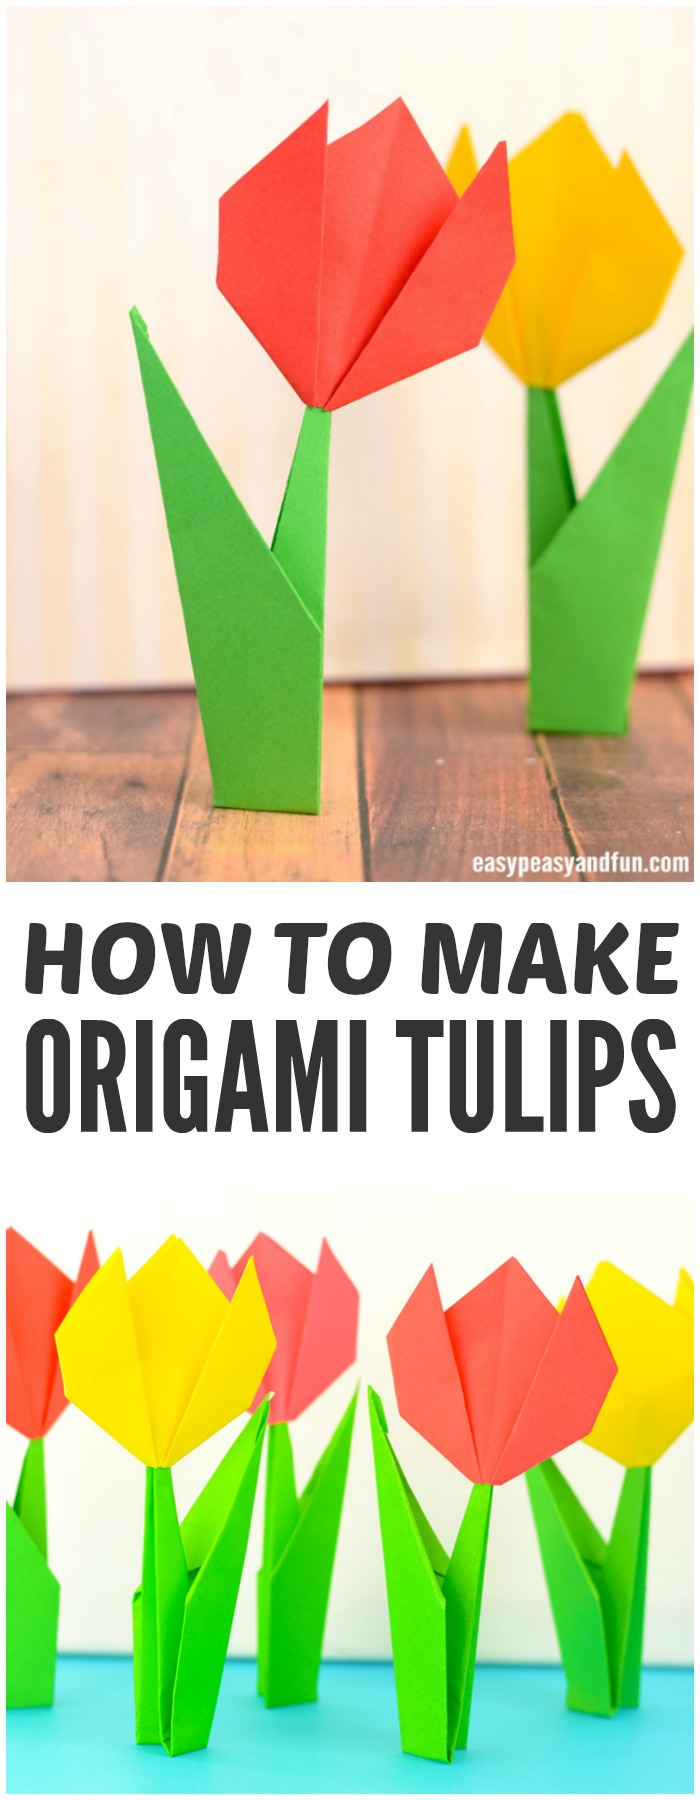 Origami Fish Directions How To Make Origami Flowers Origami Tulip Tutorial With Diagram